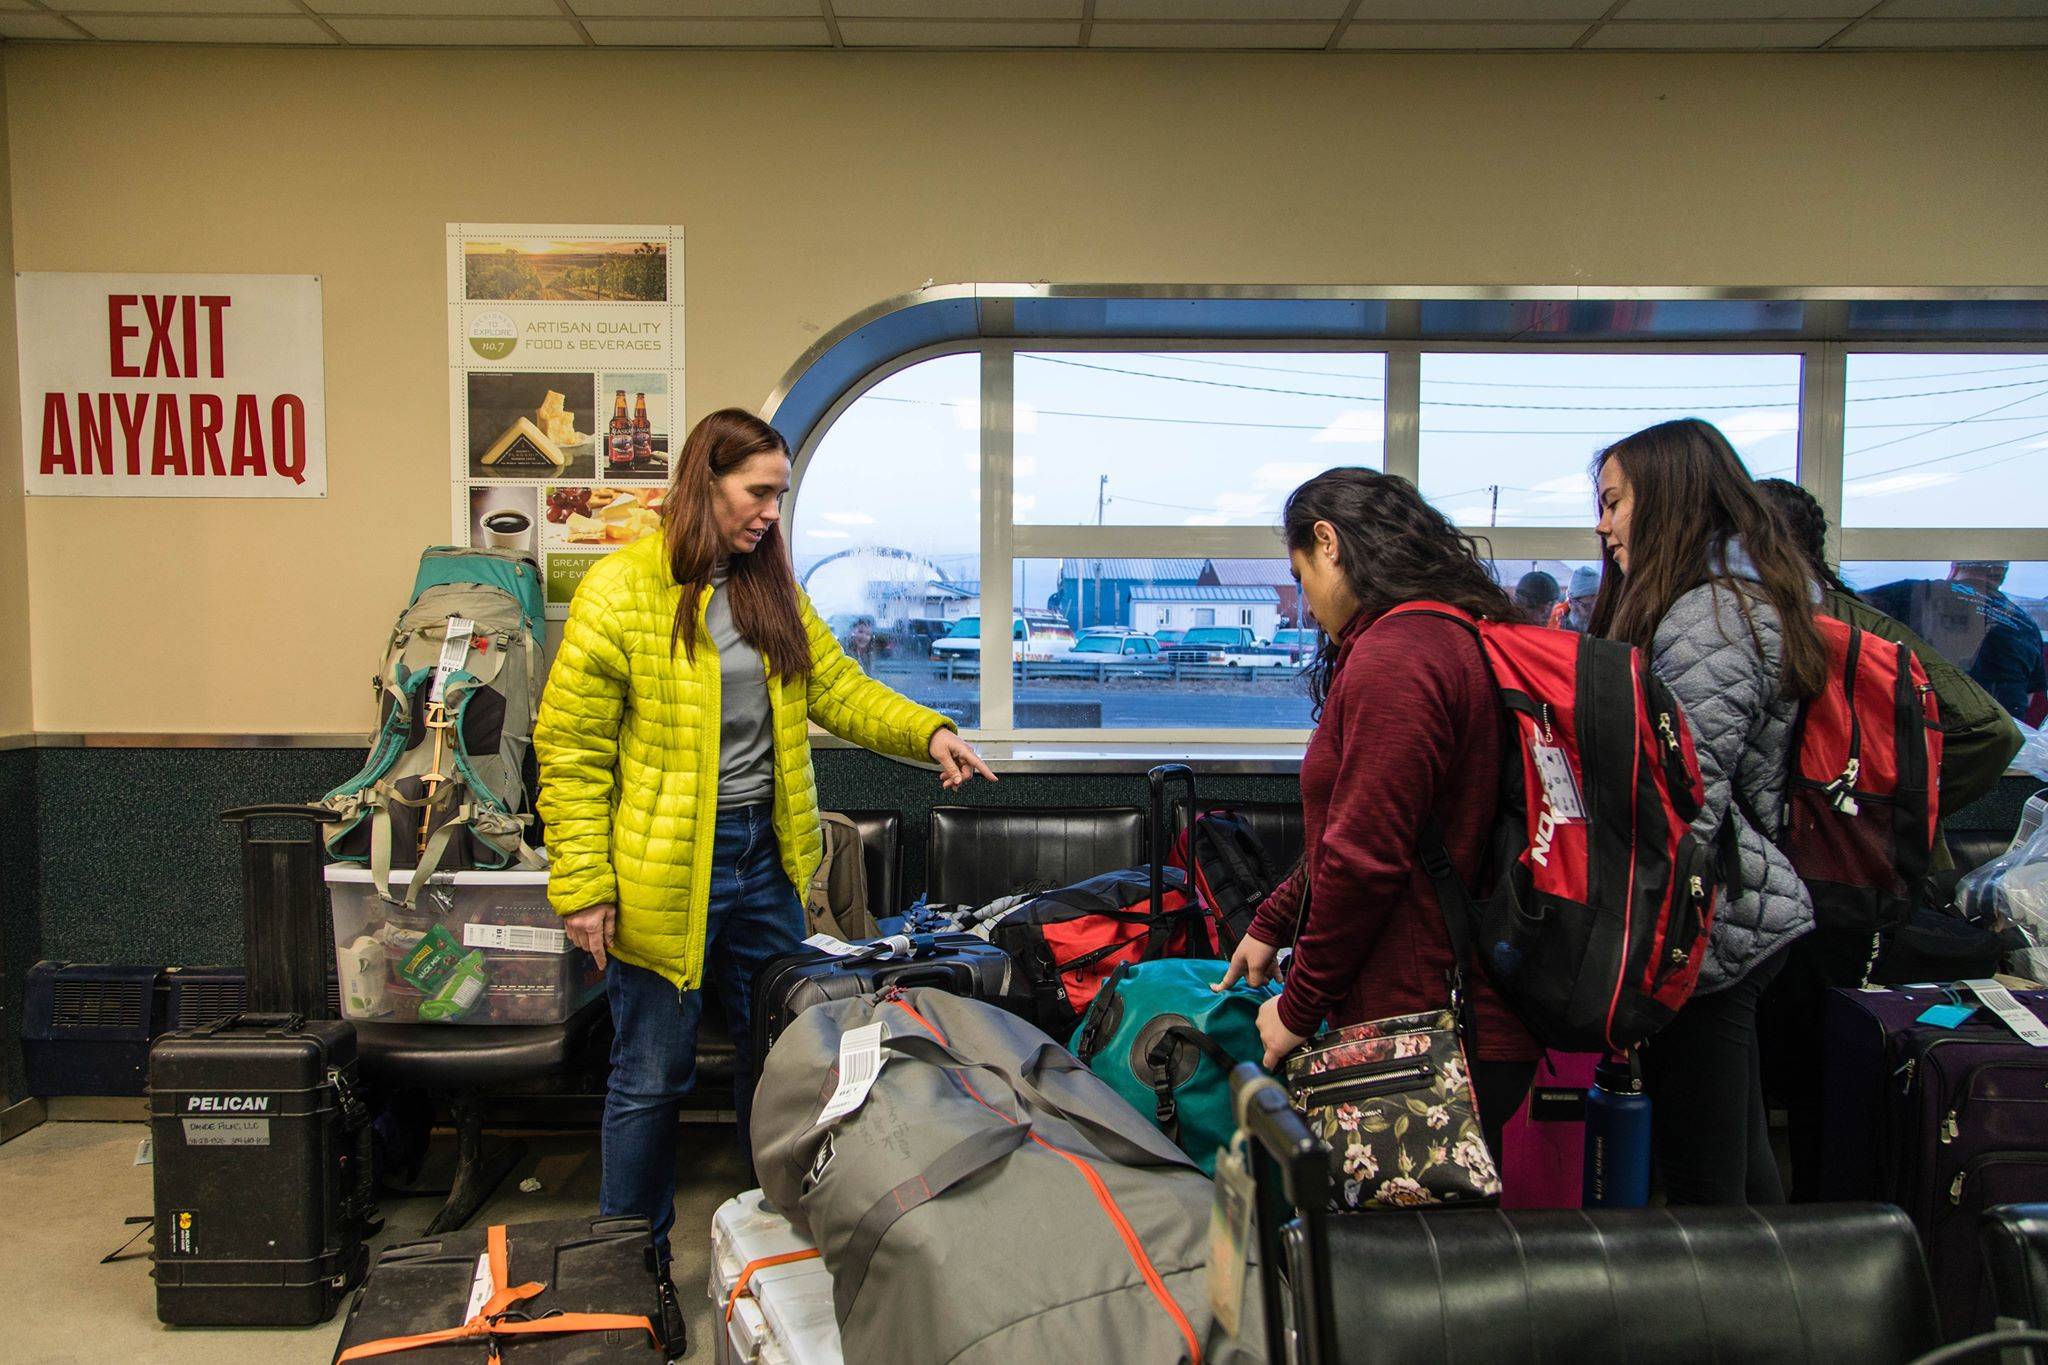 Ellen Piekarski, then a math teacher at East Anchorage High School, works with her students to organize their luggage on their trip to Scammon Bay. (Photo by Erin Irwin/Education Week)